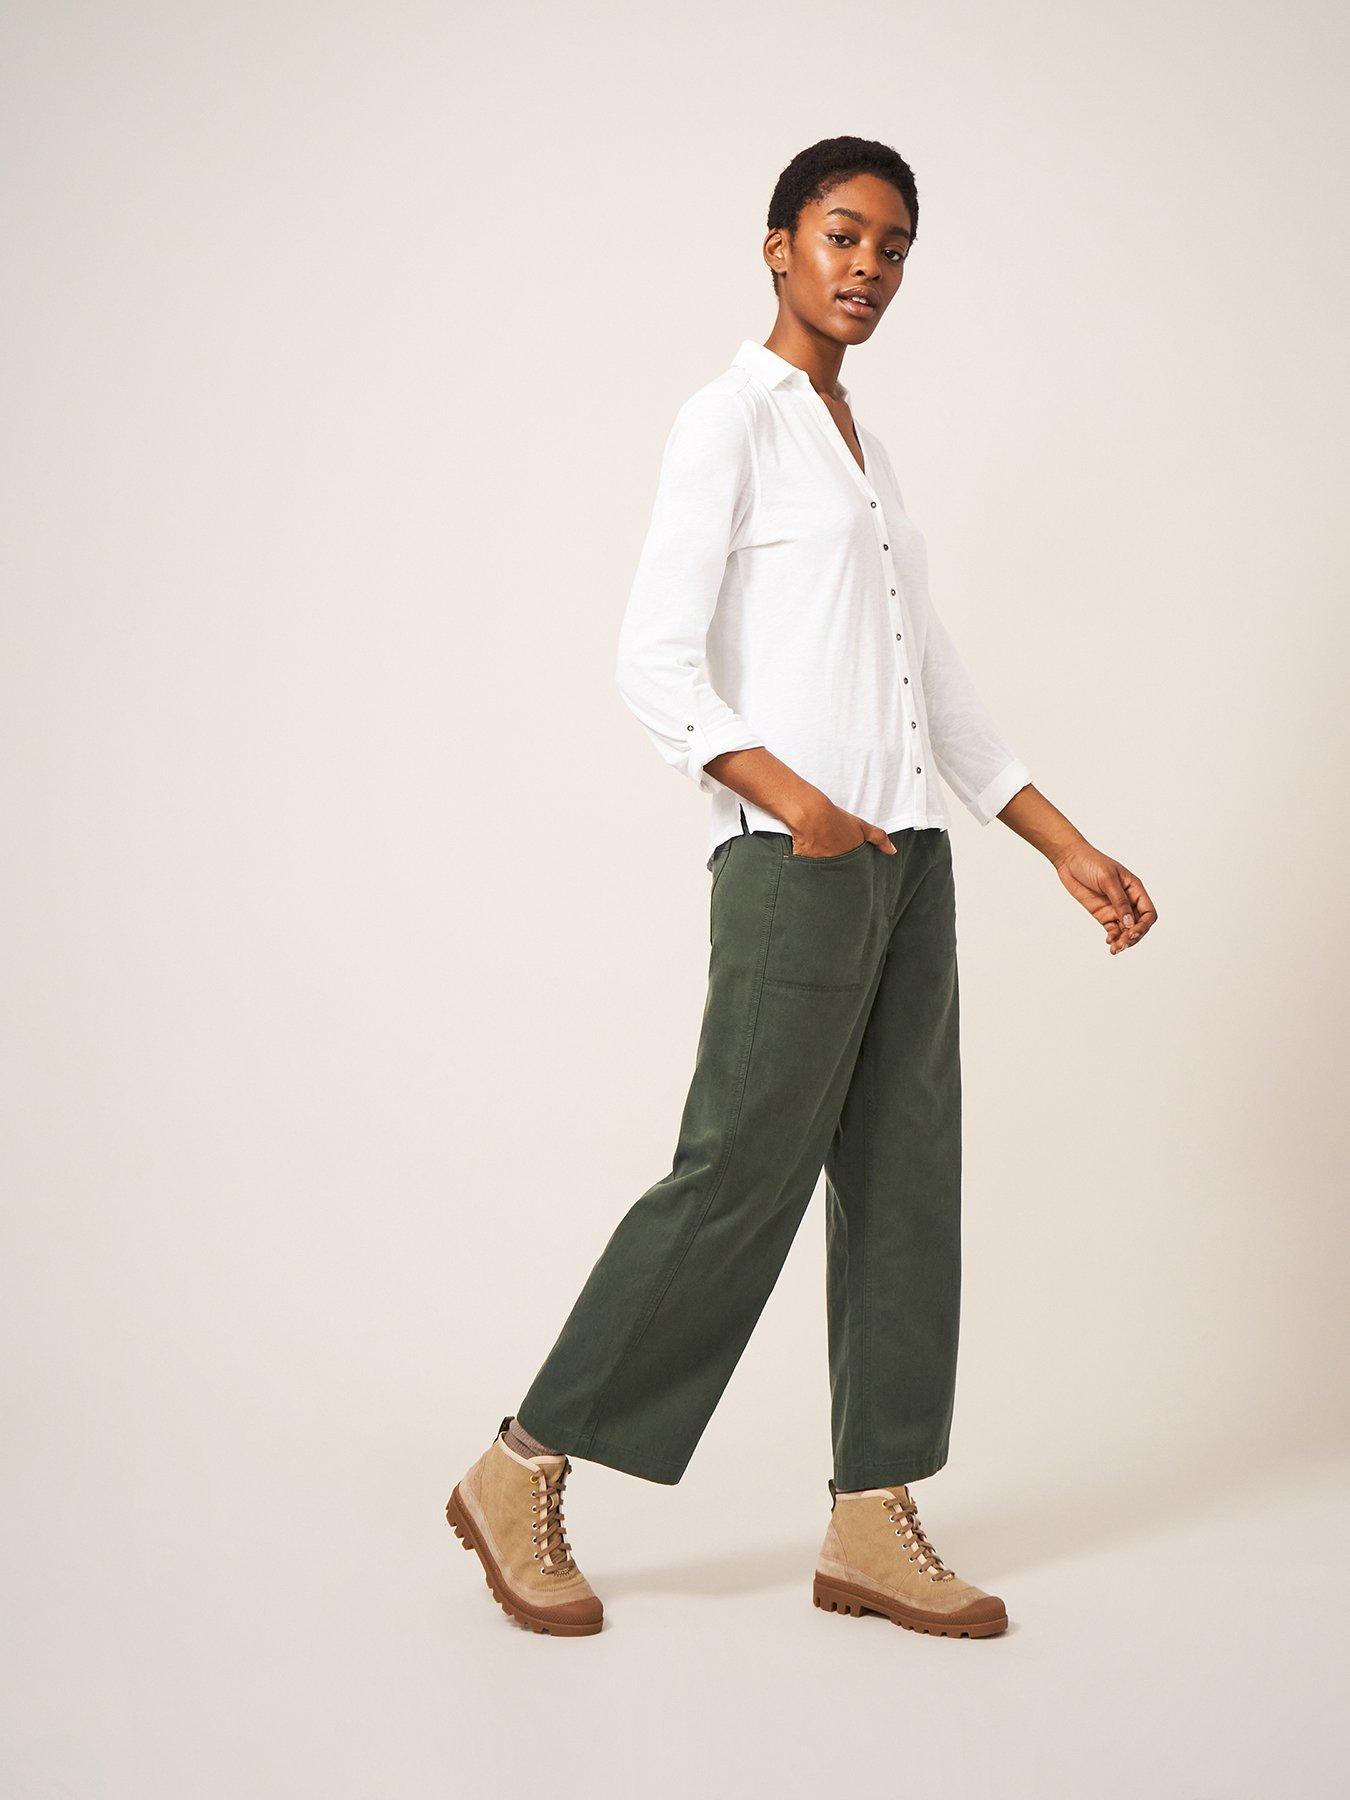 Women's Real Leather Wide-Leg Trousers - Barneys Originals